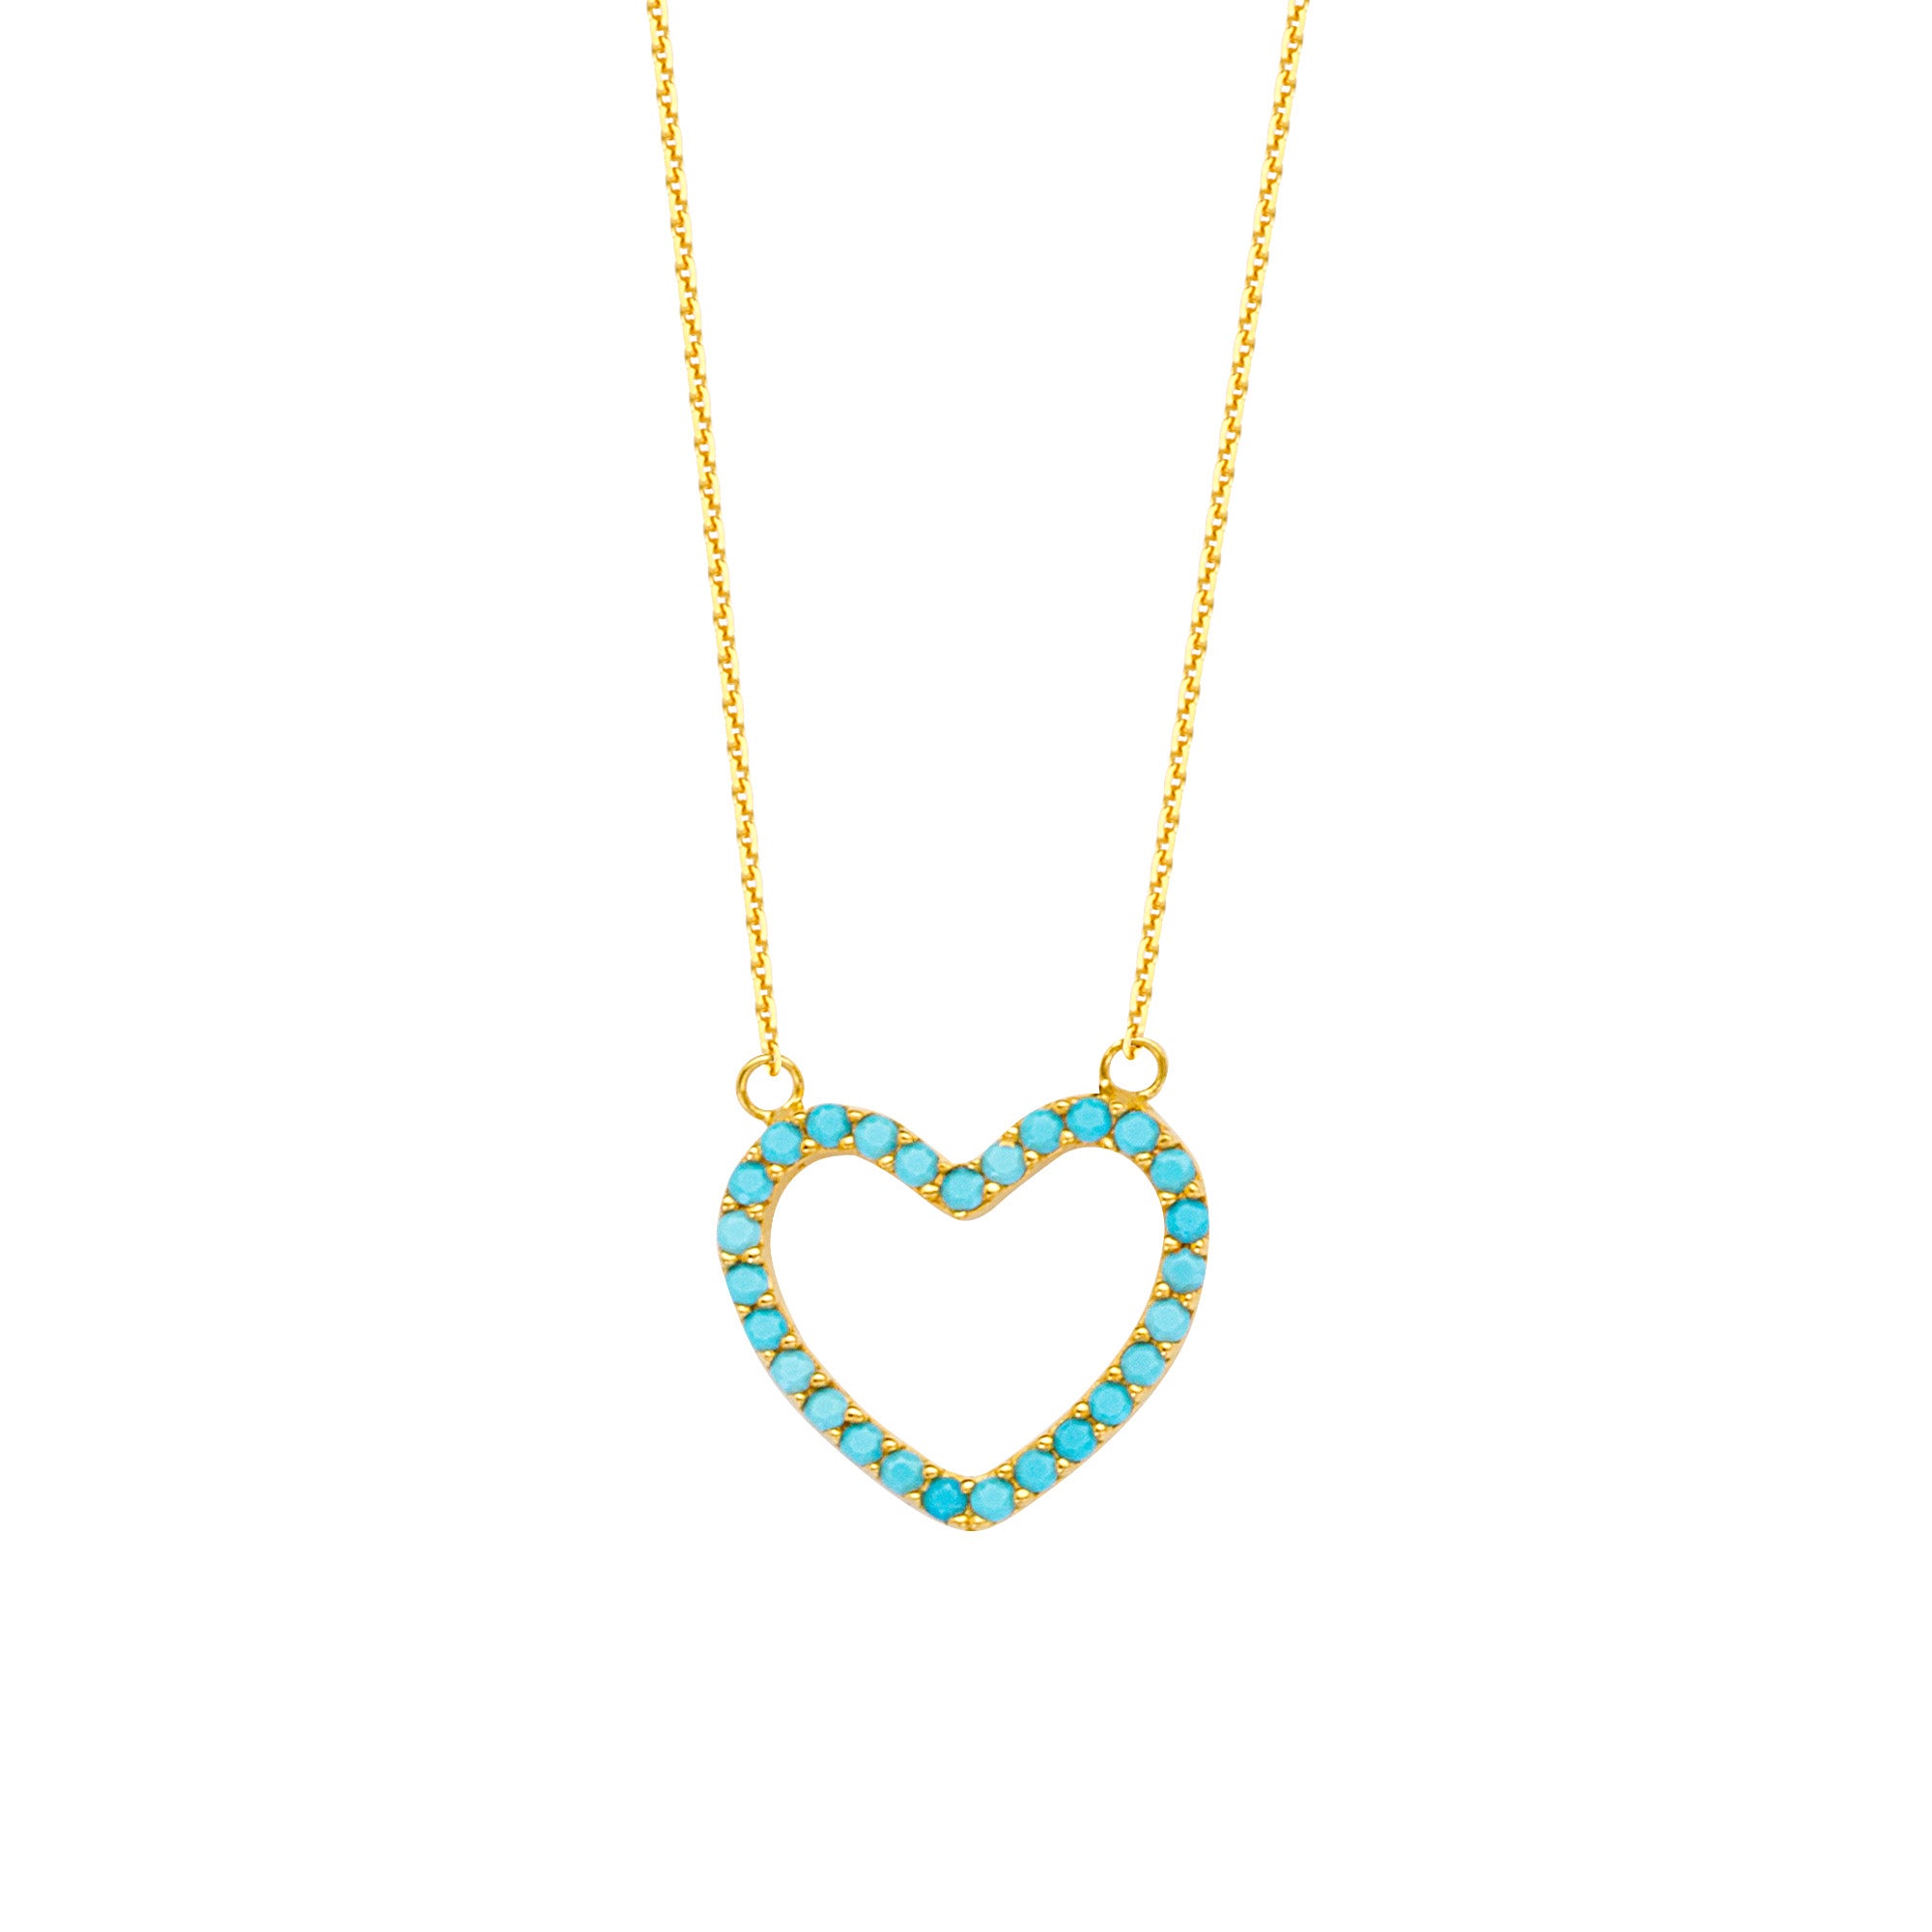 14K Yellow Gold Heart Pendant Necklace, 16" To 18" Adjustable fine designer jewelry for men and women